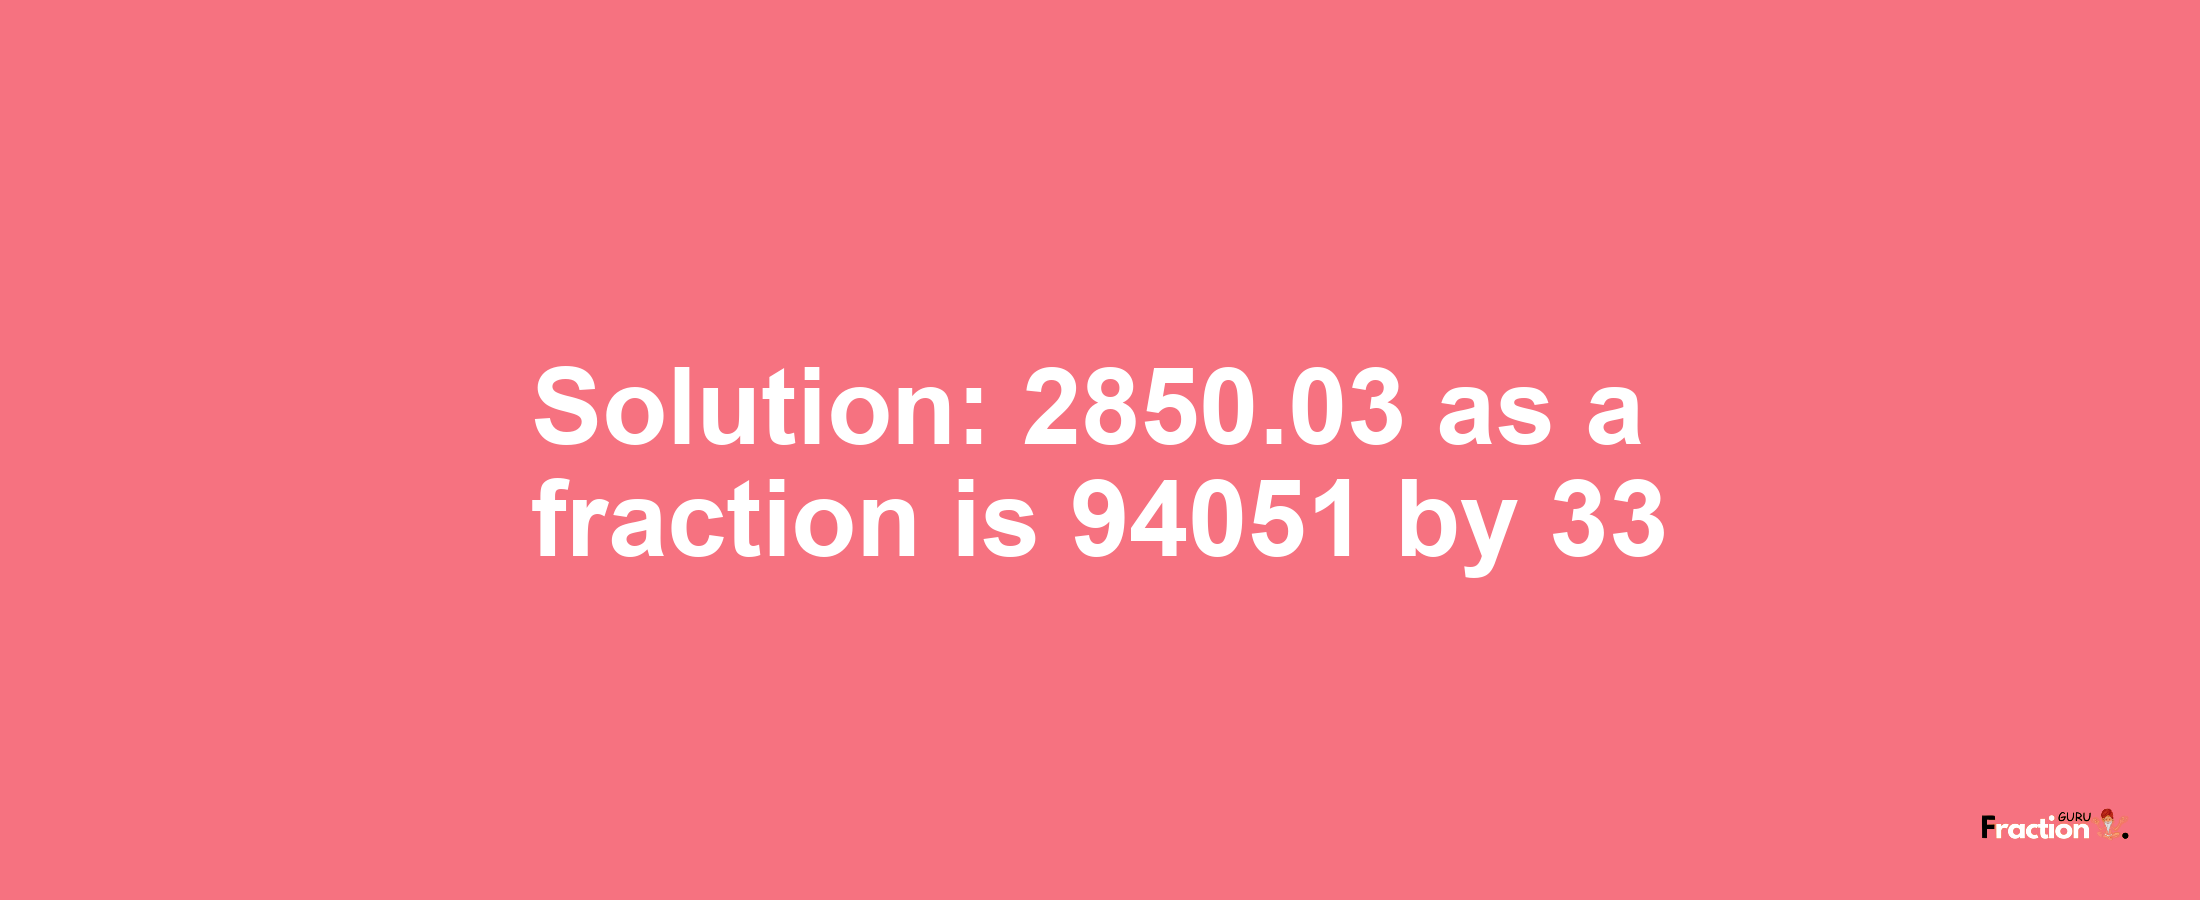 Solution:2850.03 as a fraction is 94051/33